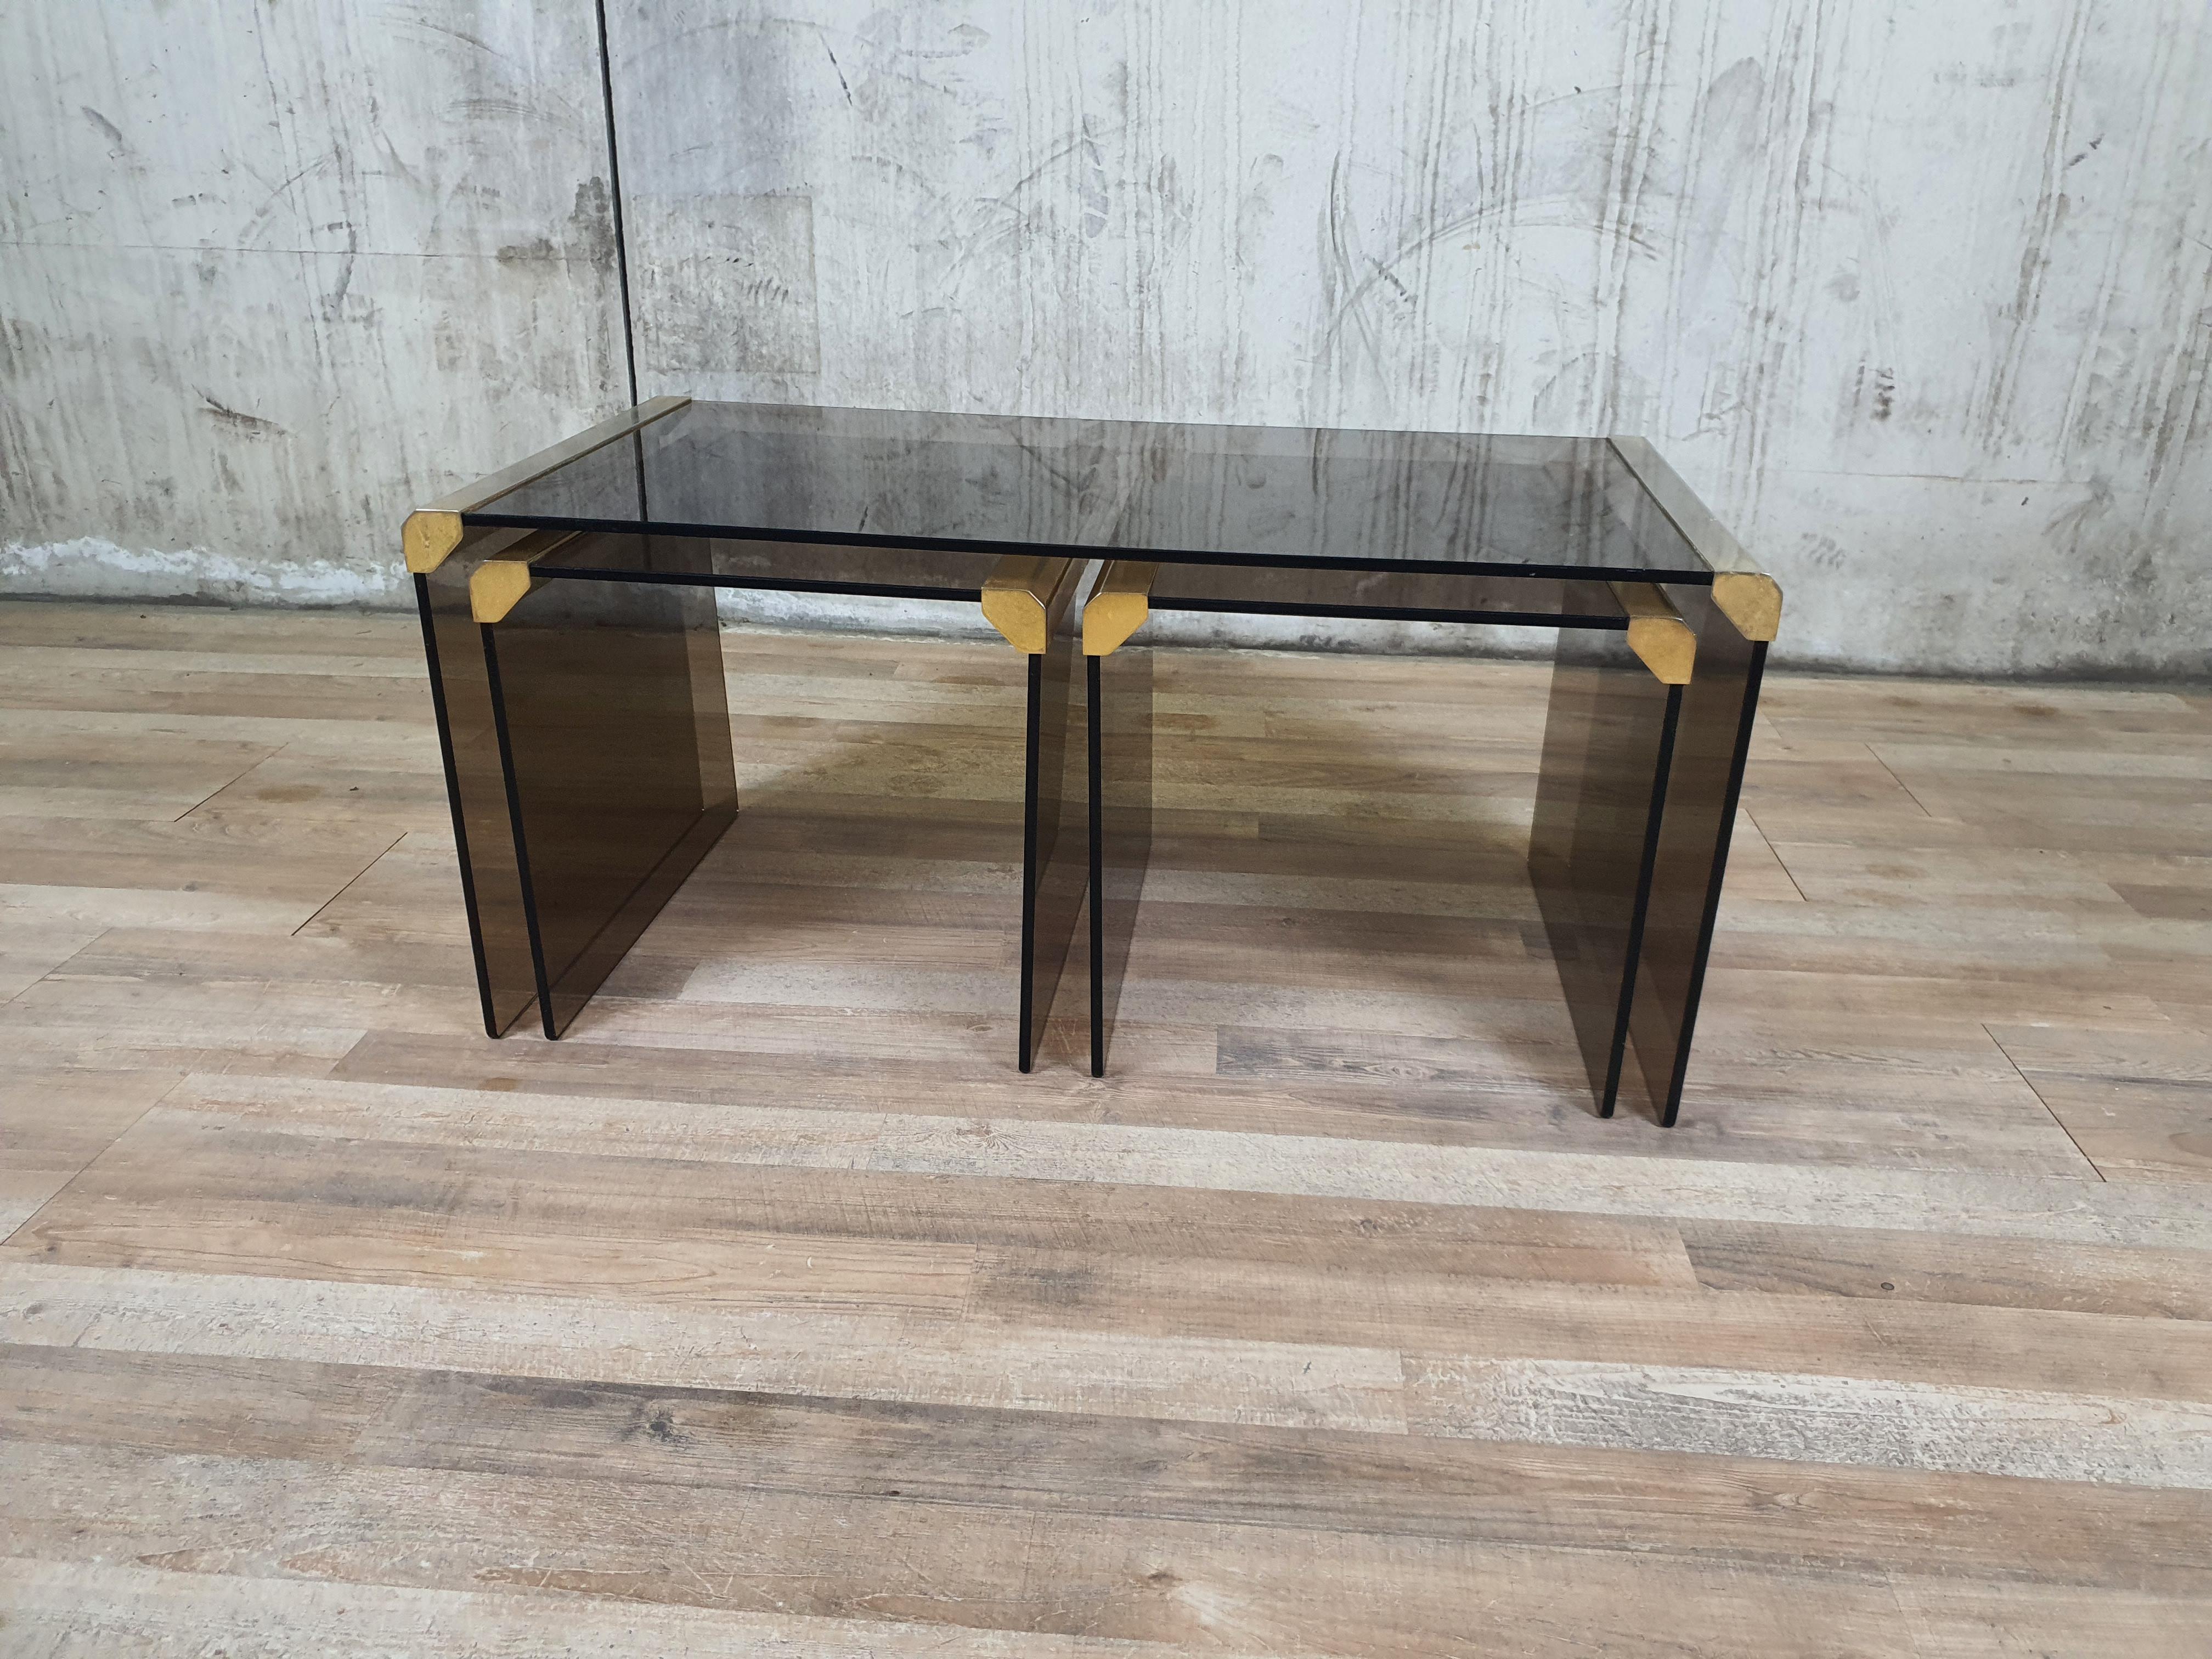 They feature a tempered smoked glass top with stainless steel edges and a mirror interior.

They do not bear the brand as the original label was a simple sticker which, given the past, can be unglued or removed.

Large table measures L 80.5cm D